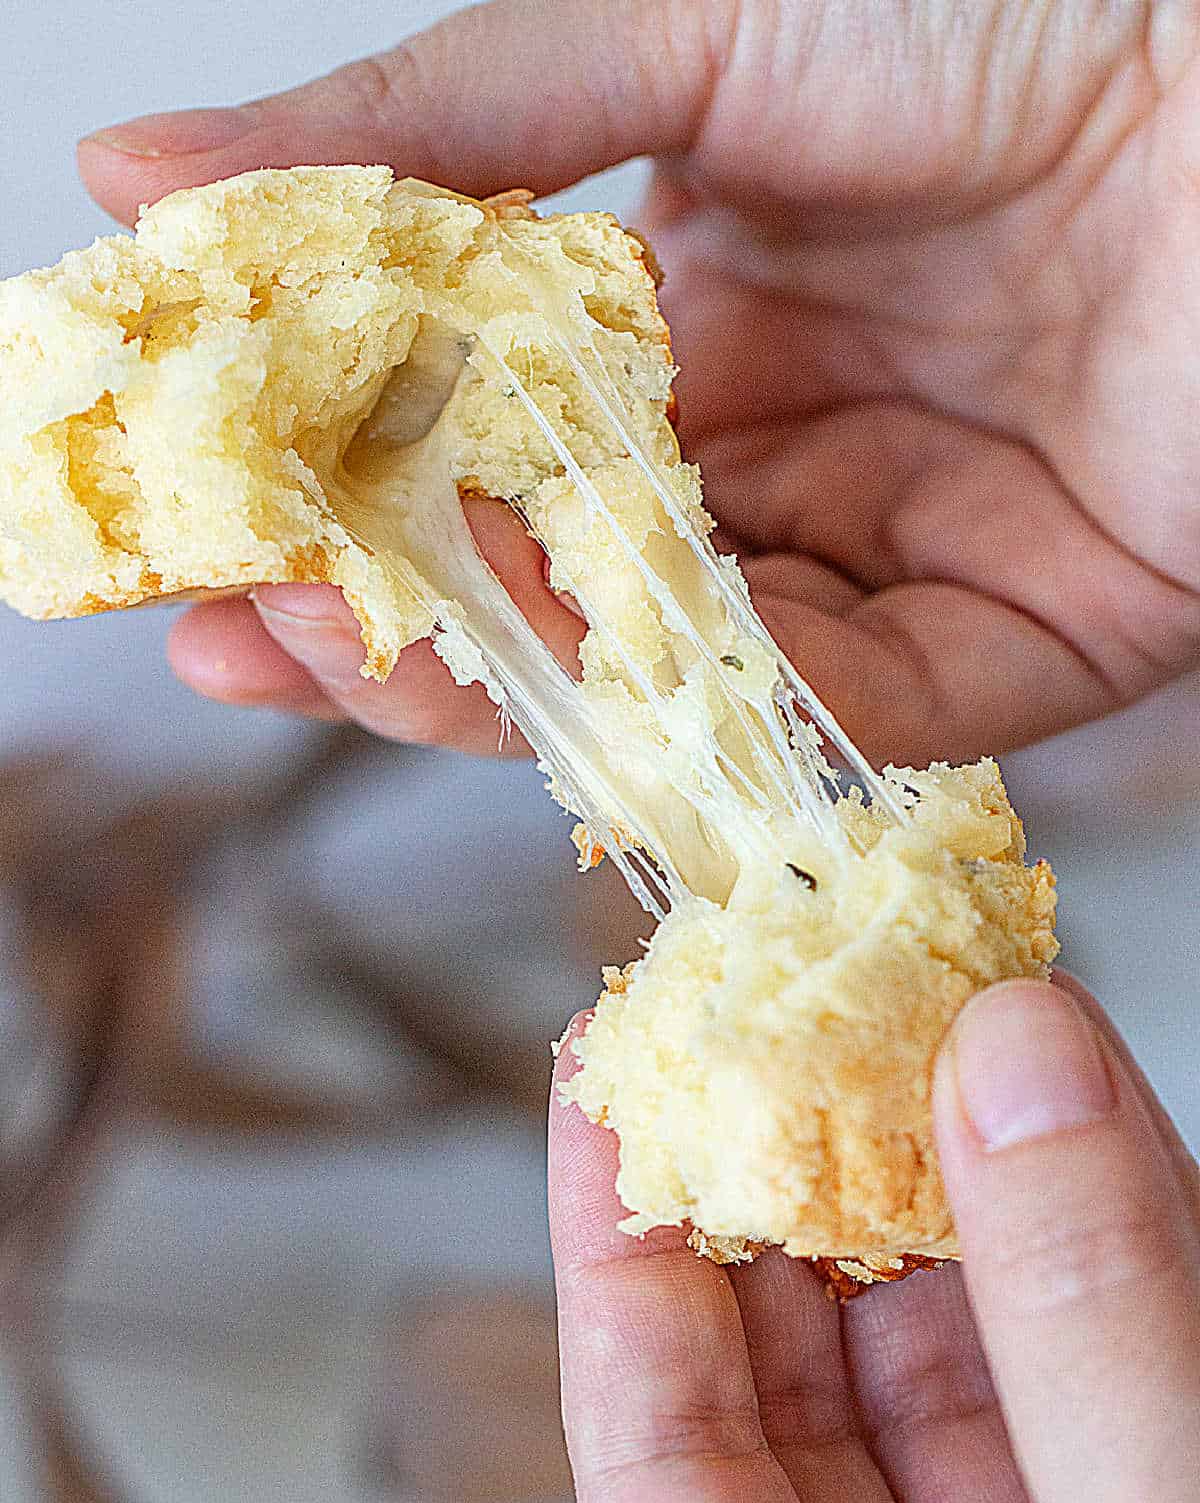 Hands pulling apart scone, cheesy strands